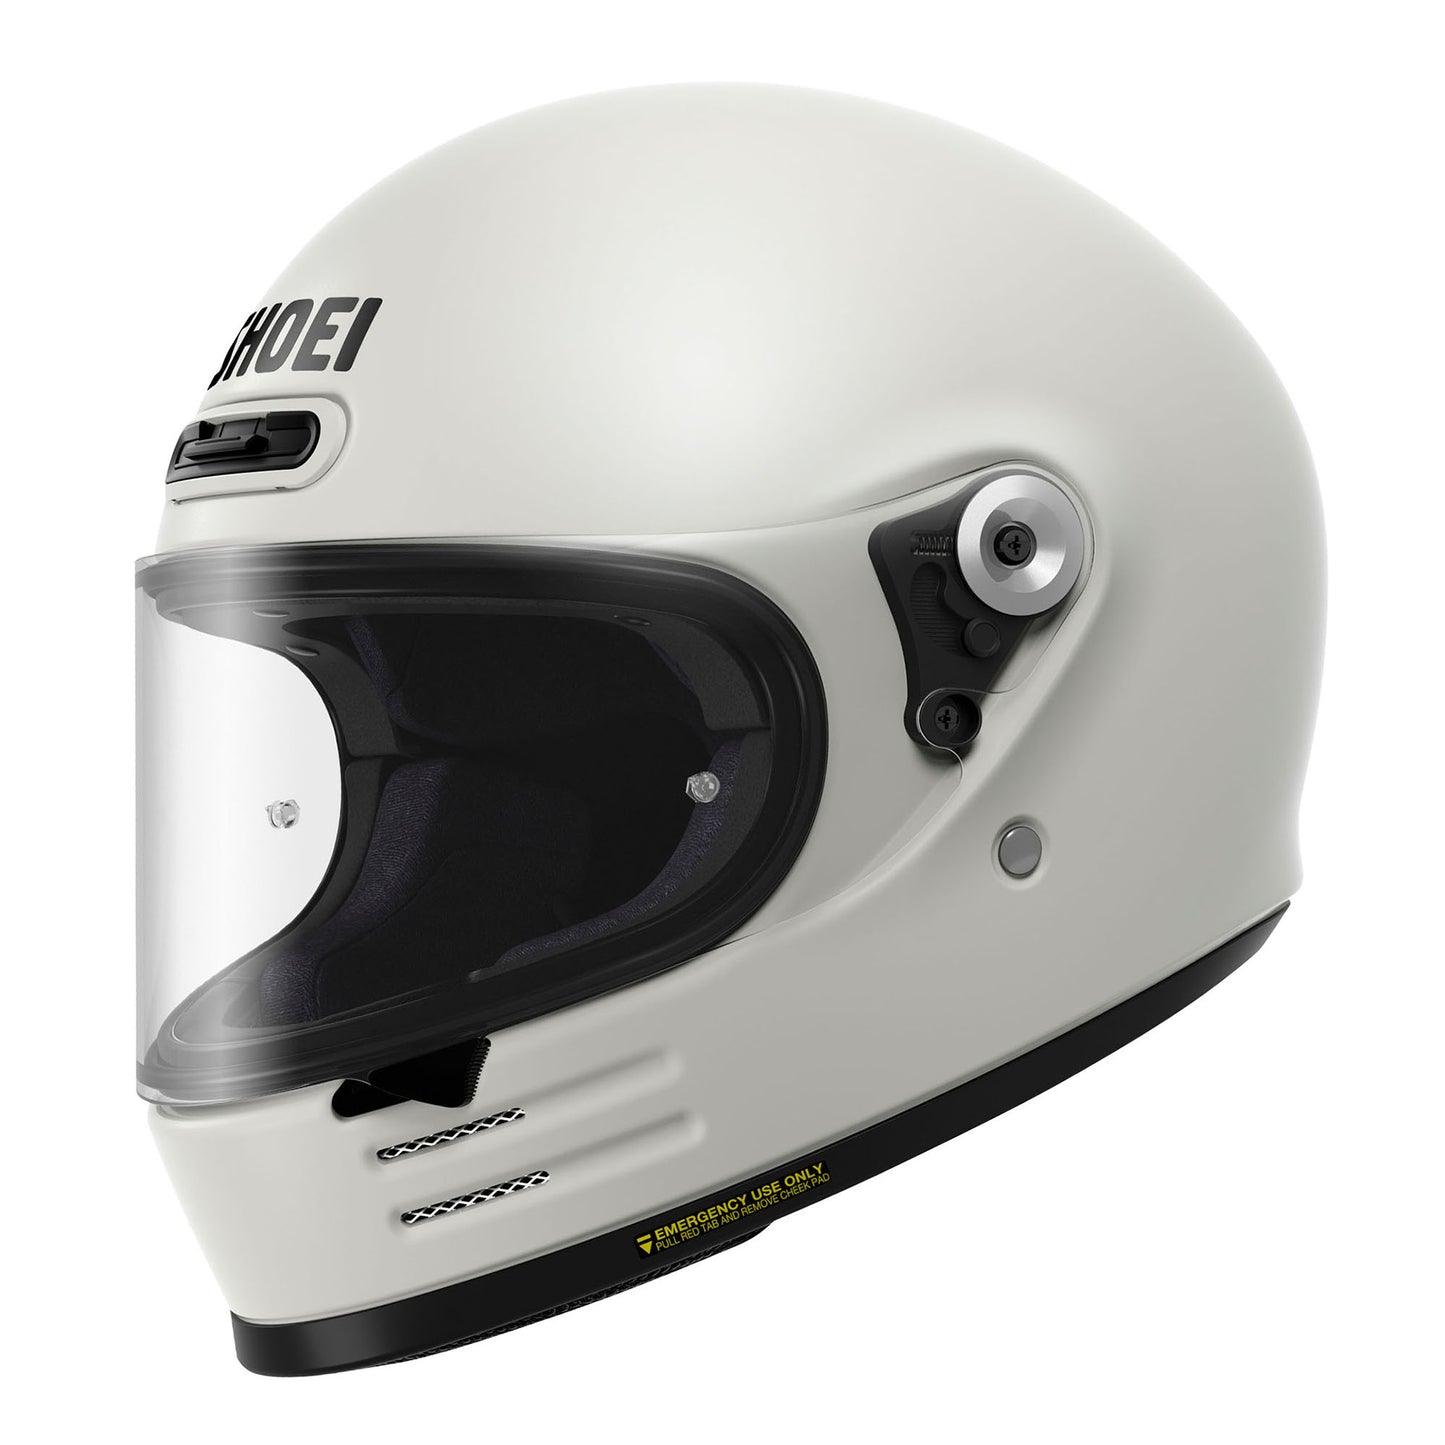 Capacete Shoei Glamster 06